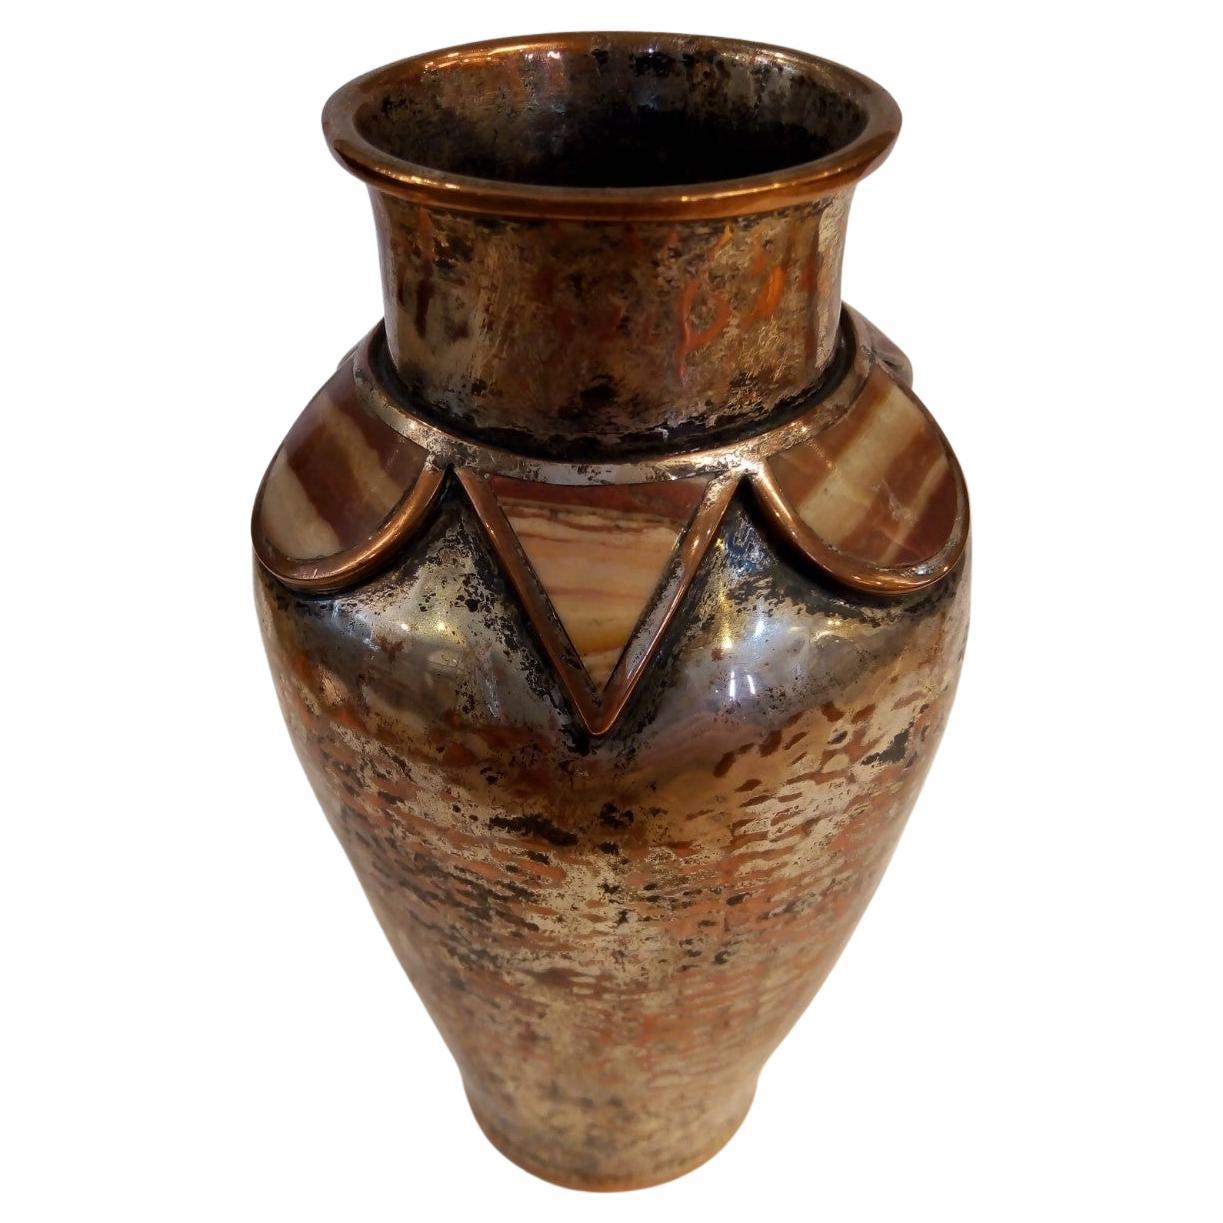 Beautiful small vase in hammered copper silver-plated made by Emilia Castillo from 